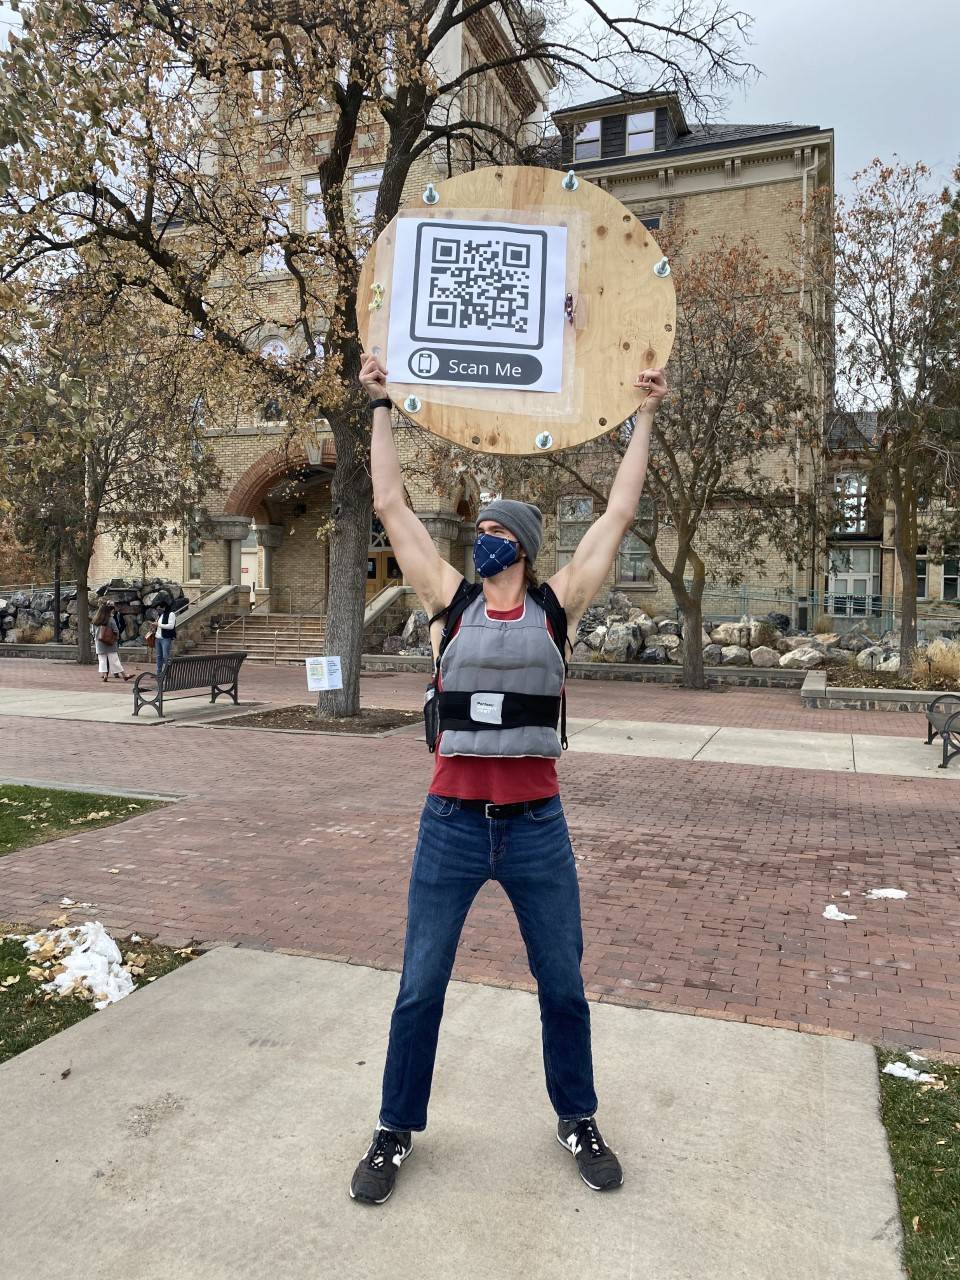 Daniel Porter wearing body weights and holding a QR Code